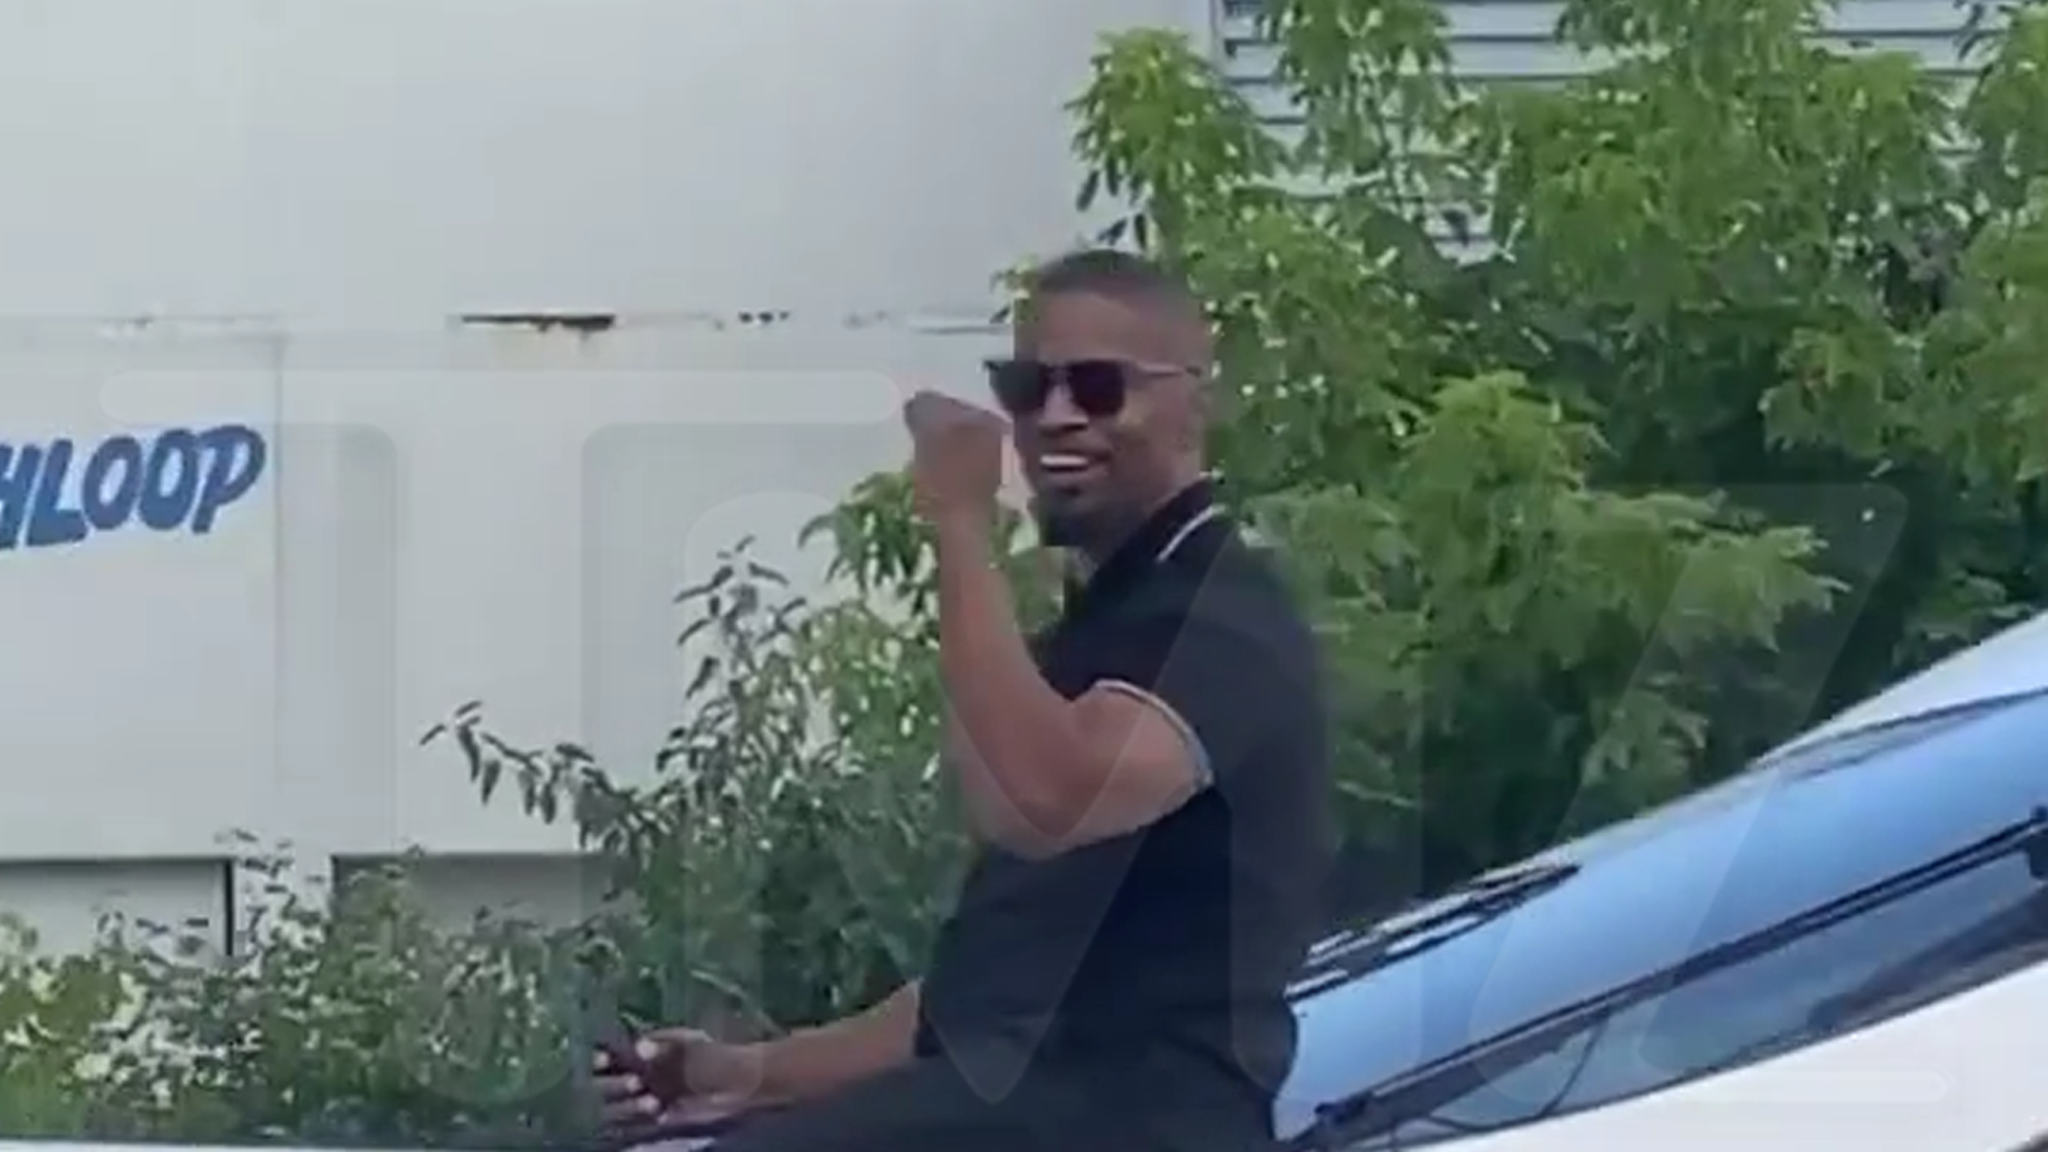 Jamie Foxx waves to fans on a boat, the first sighting since his hospitalization